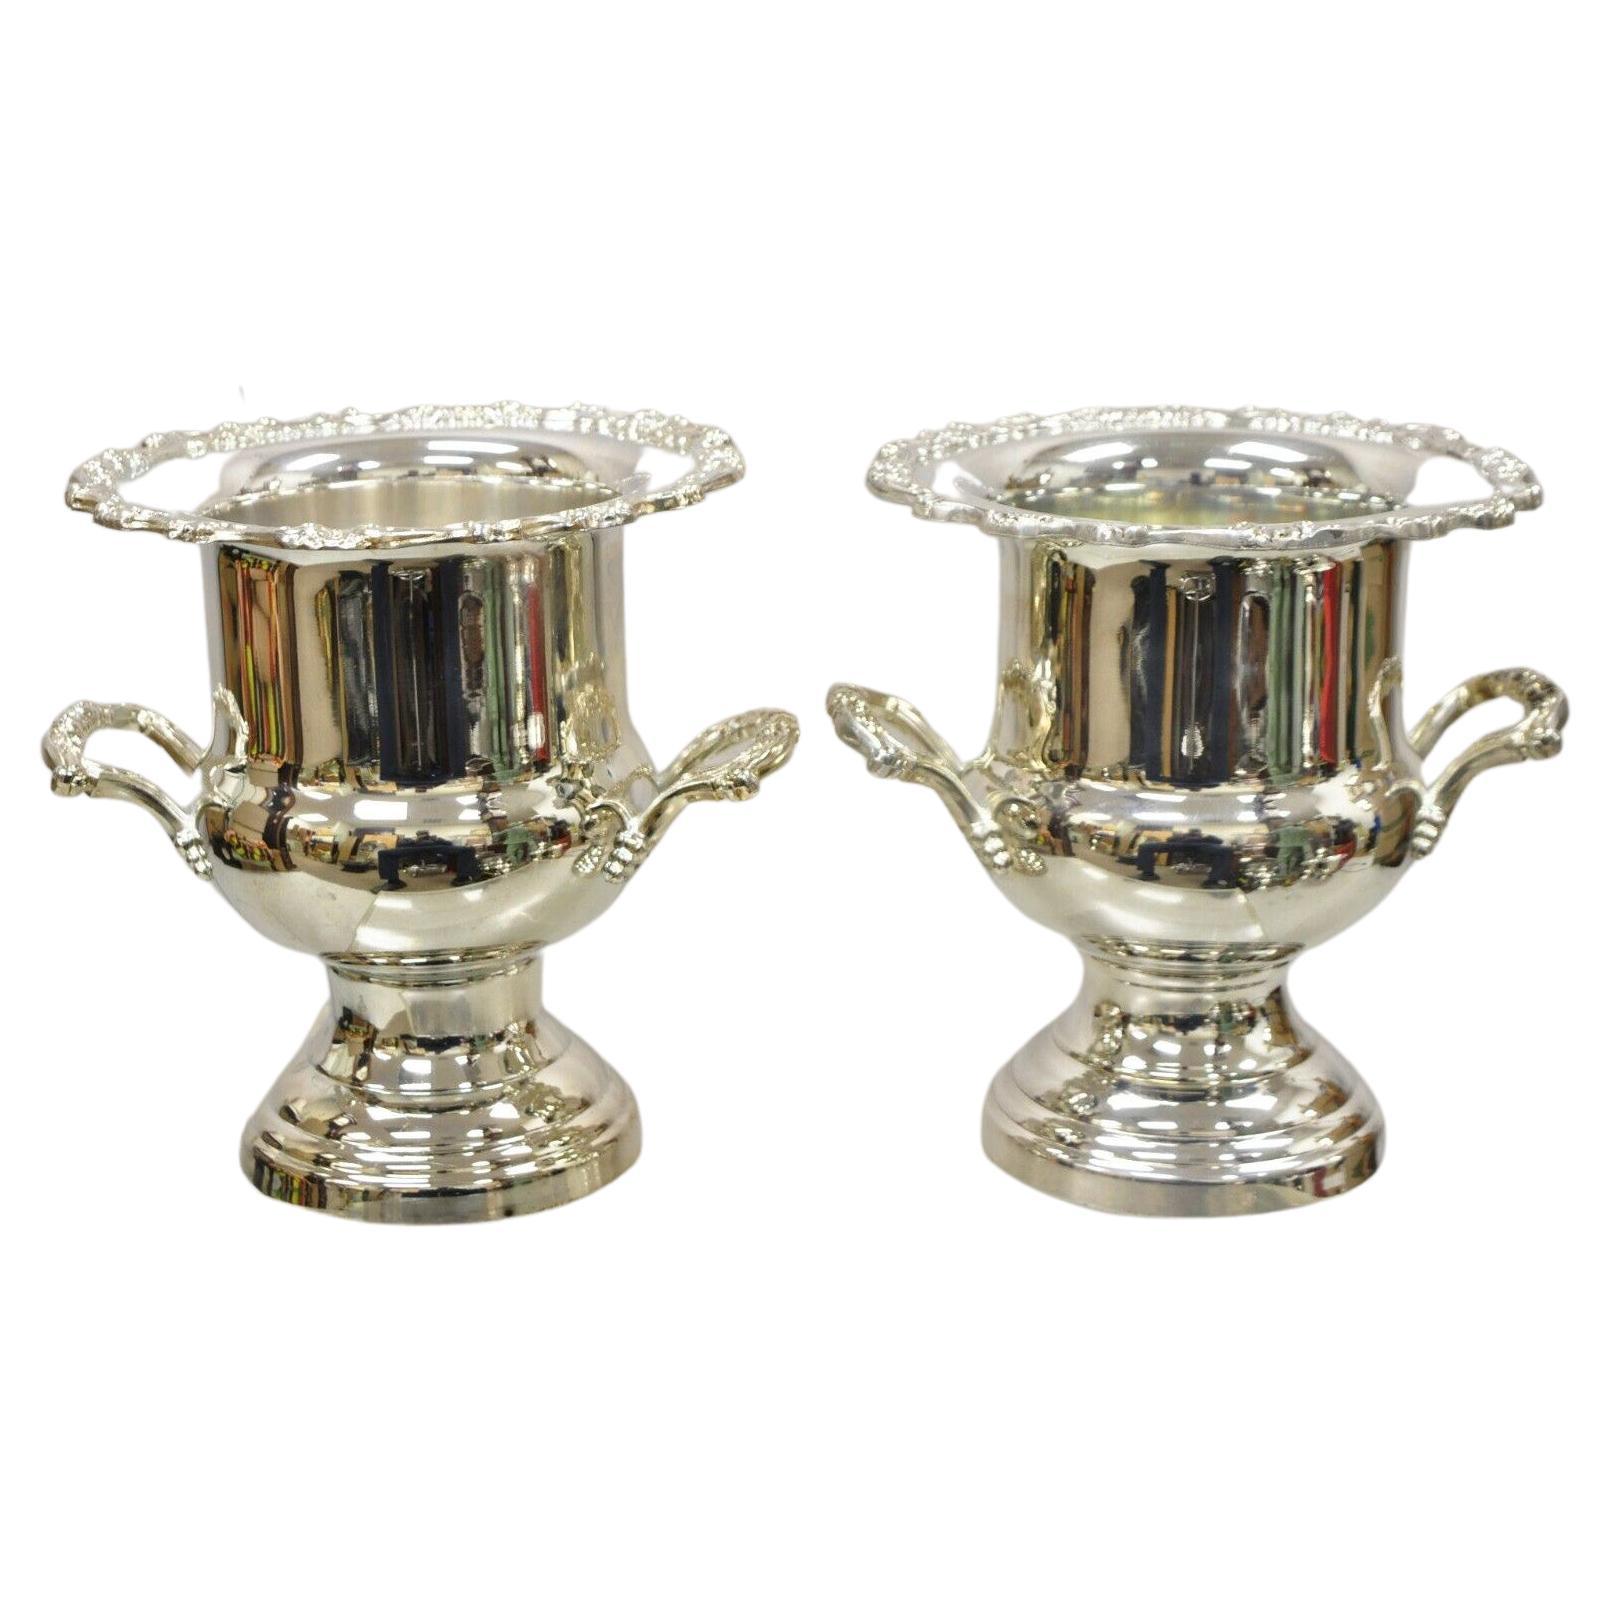 Vintage Oneida Regency Style Silver Plated Champagne Ice Bucket, a Pair For Sale